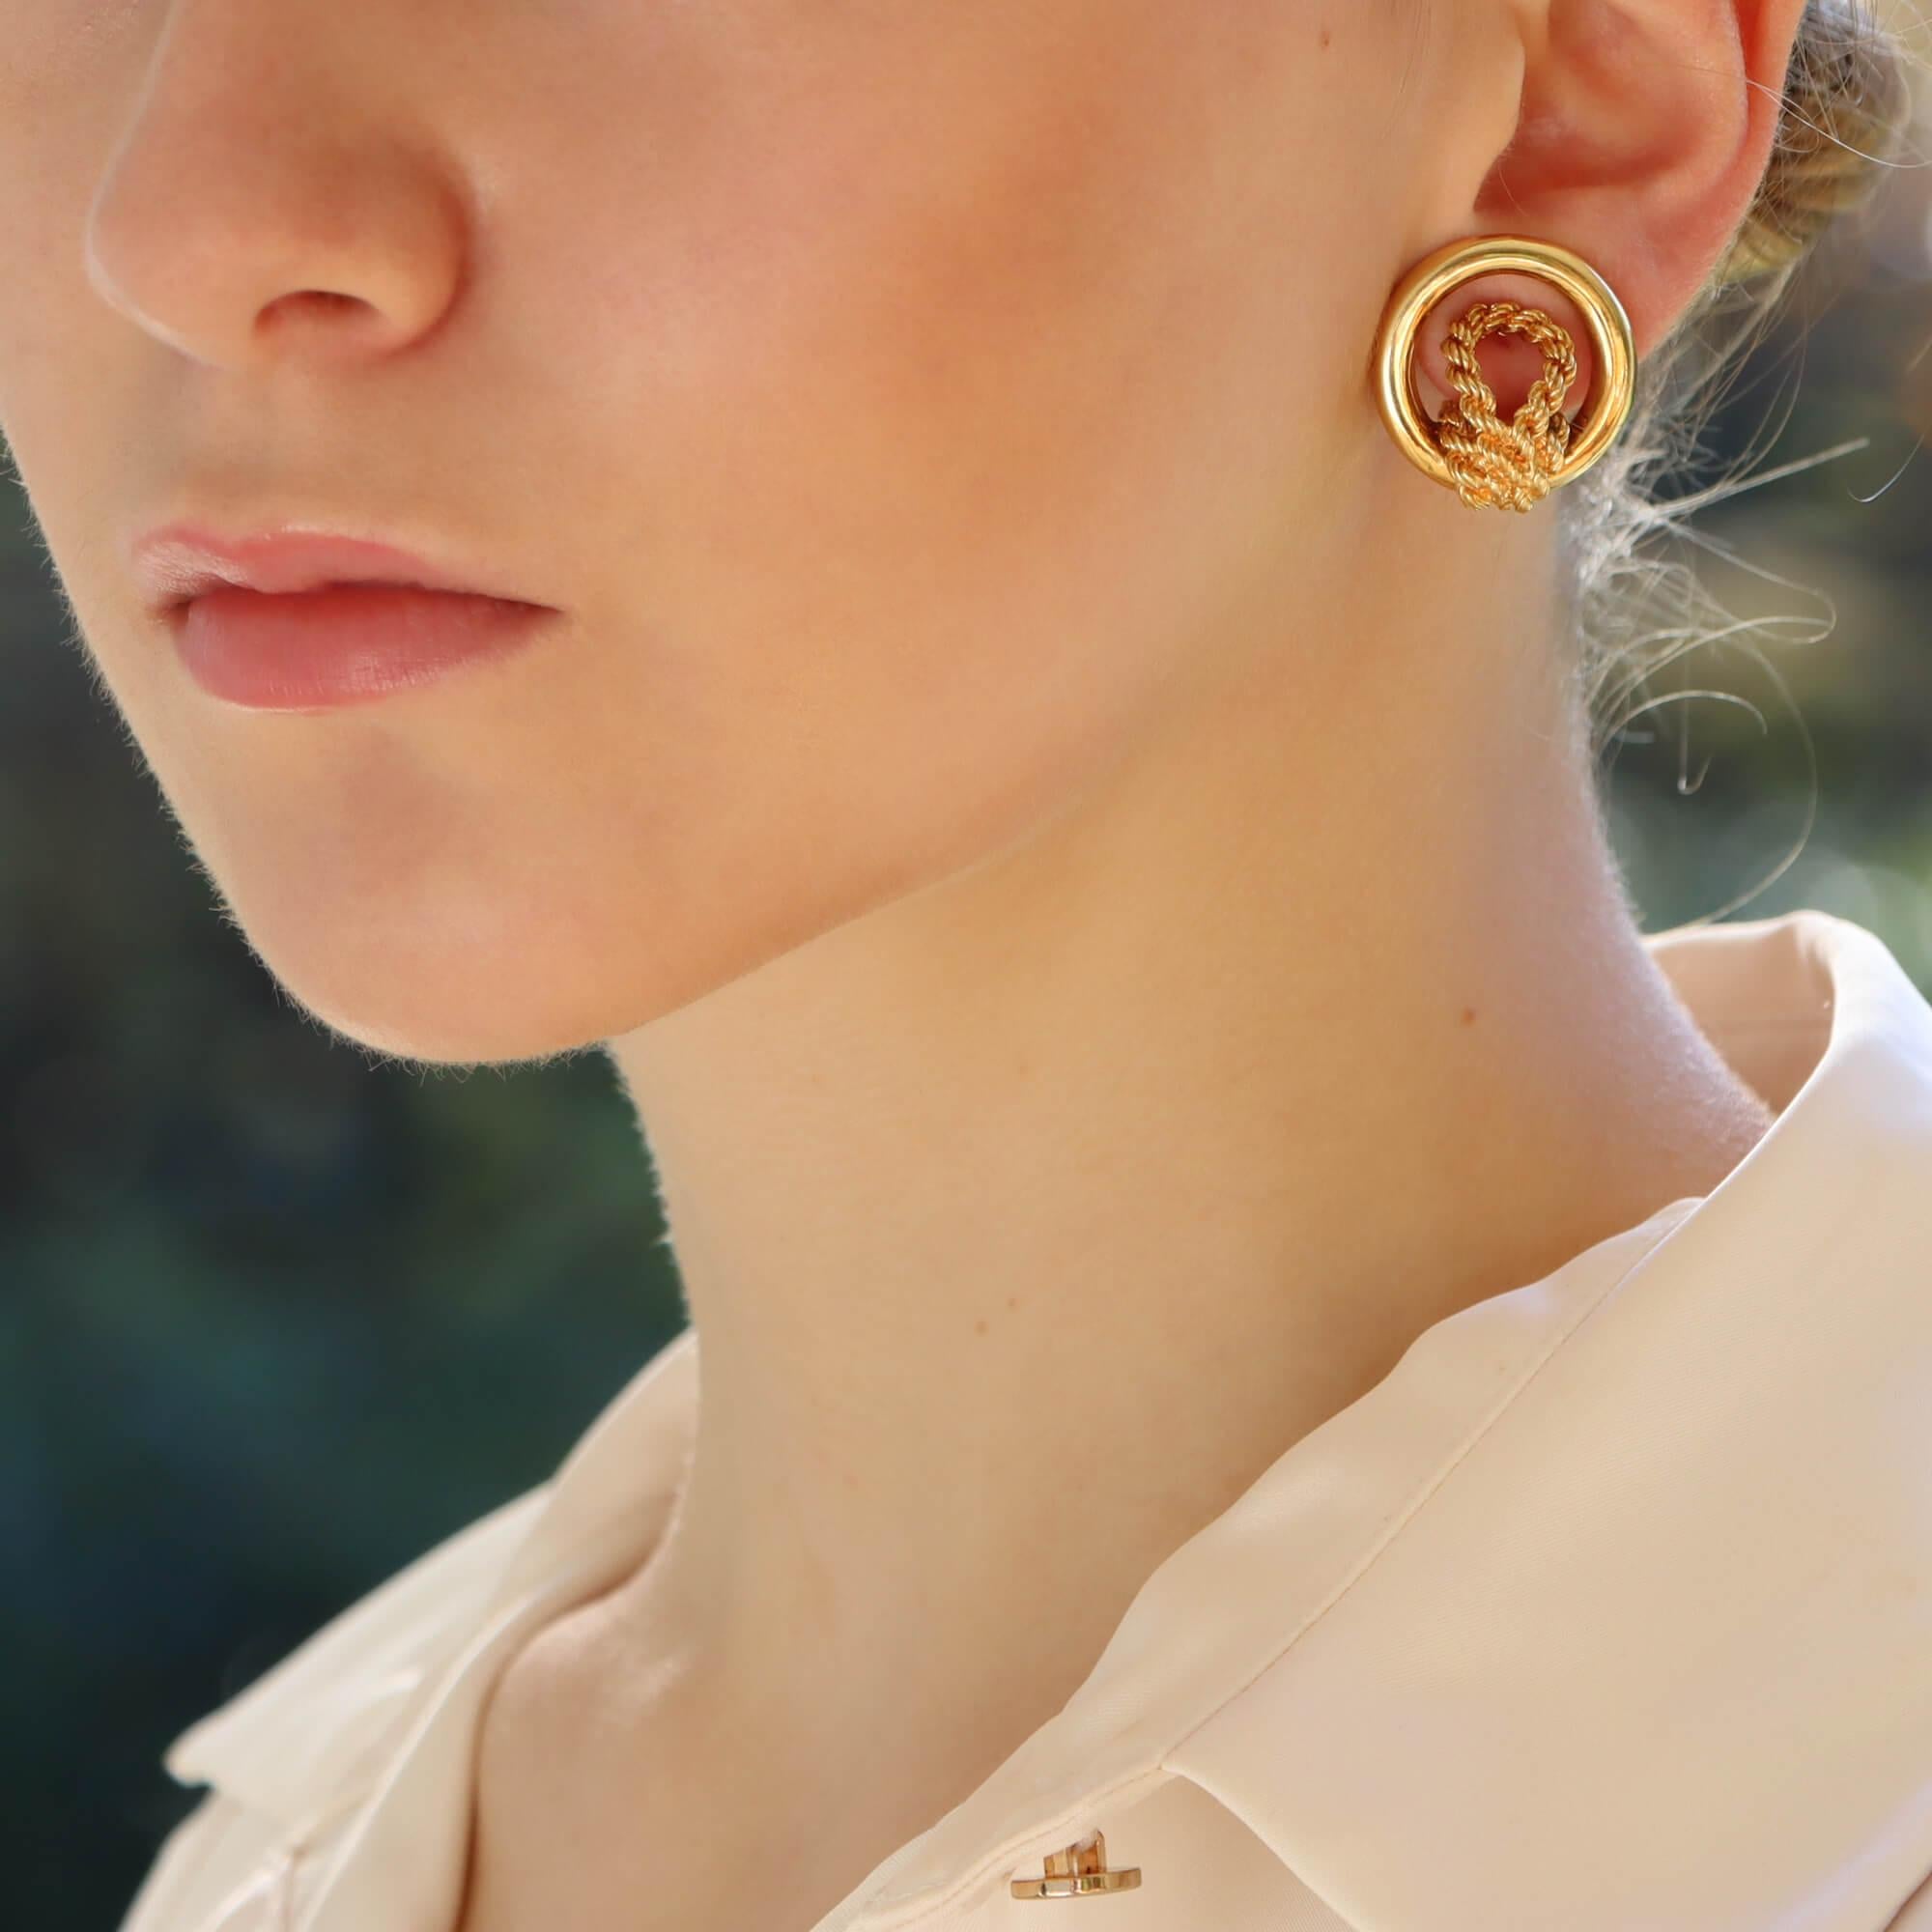  A spectacular pair vintage Hermès circular knotted rope earrings set in 18k yellow gold.

Each earring centrally features the iconic Hermès knot motif which is beautifully designed with ridged engraved detailing. Surrounding the knot is a solid